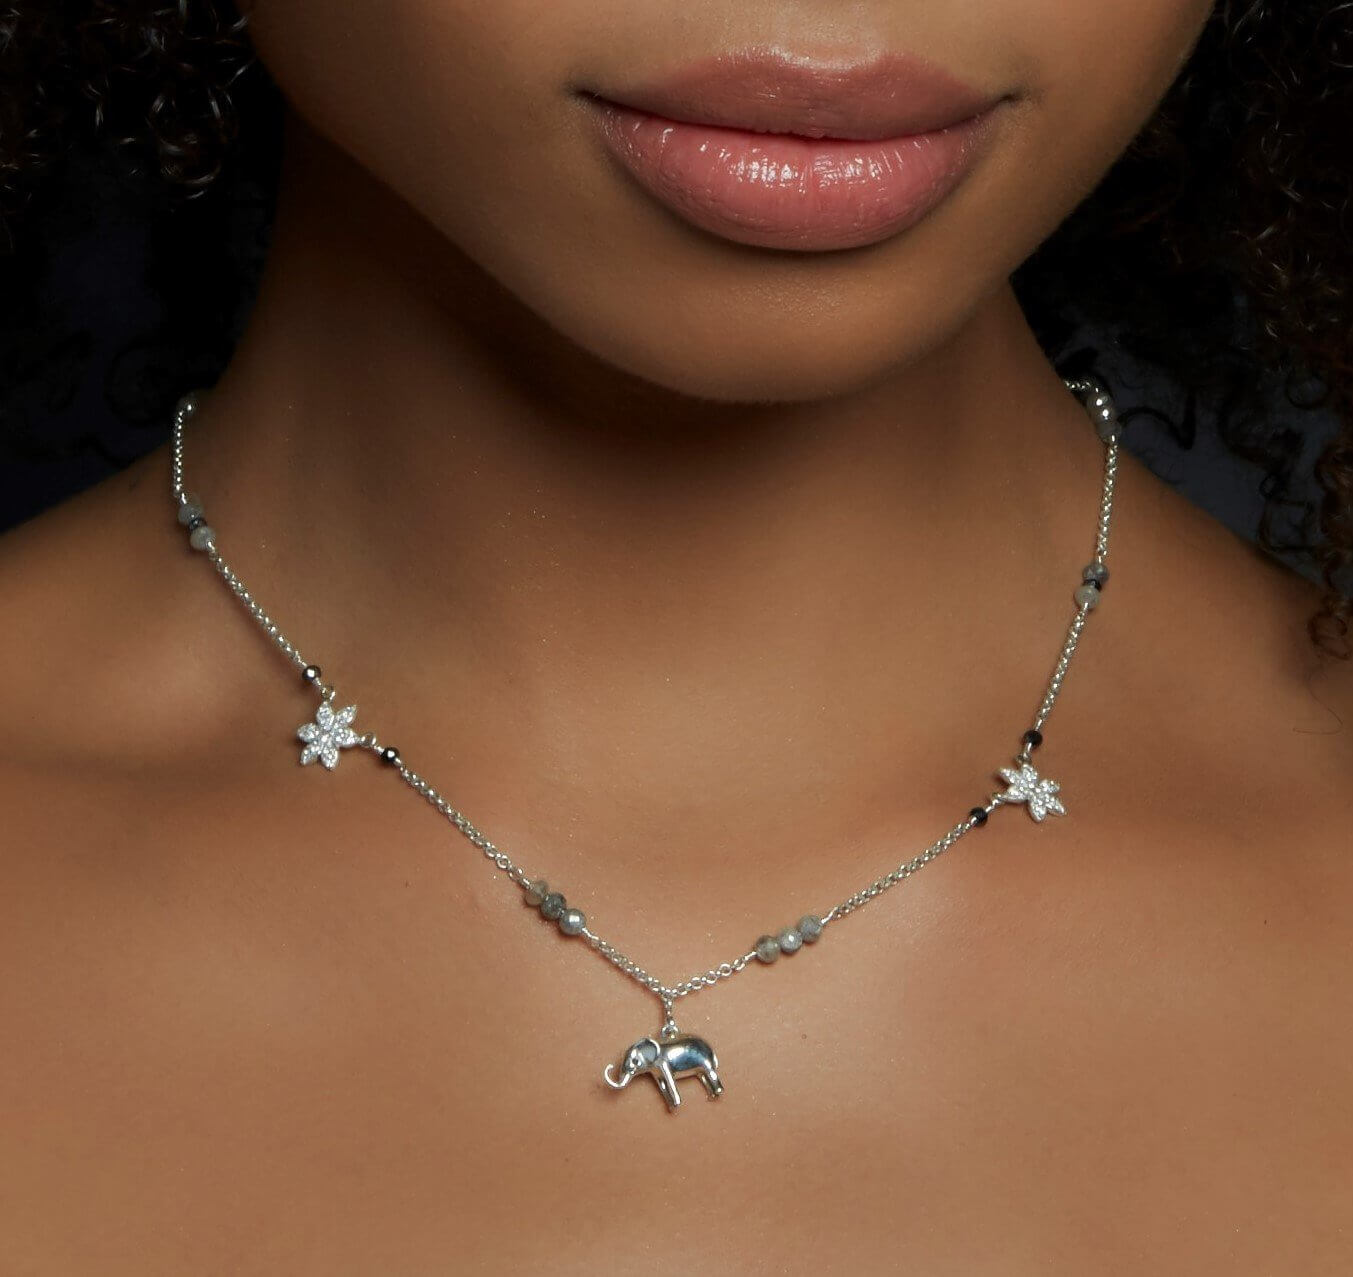 Moonflower Charm Necklace